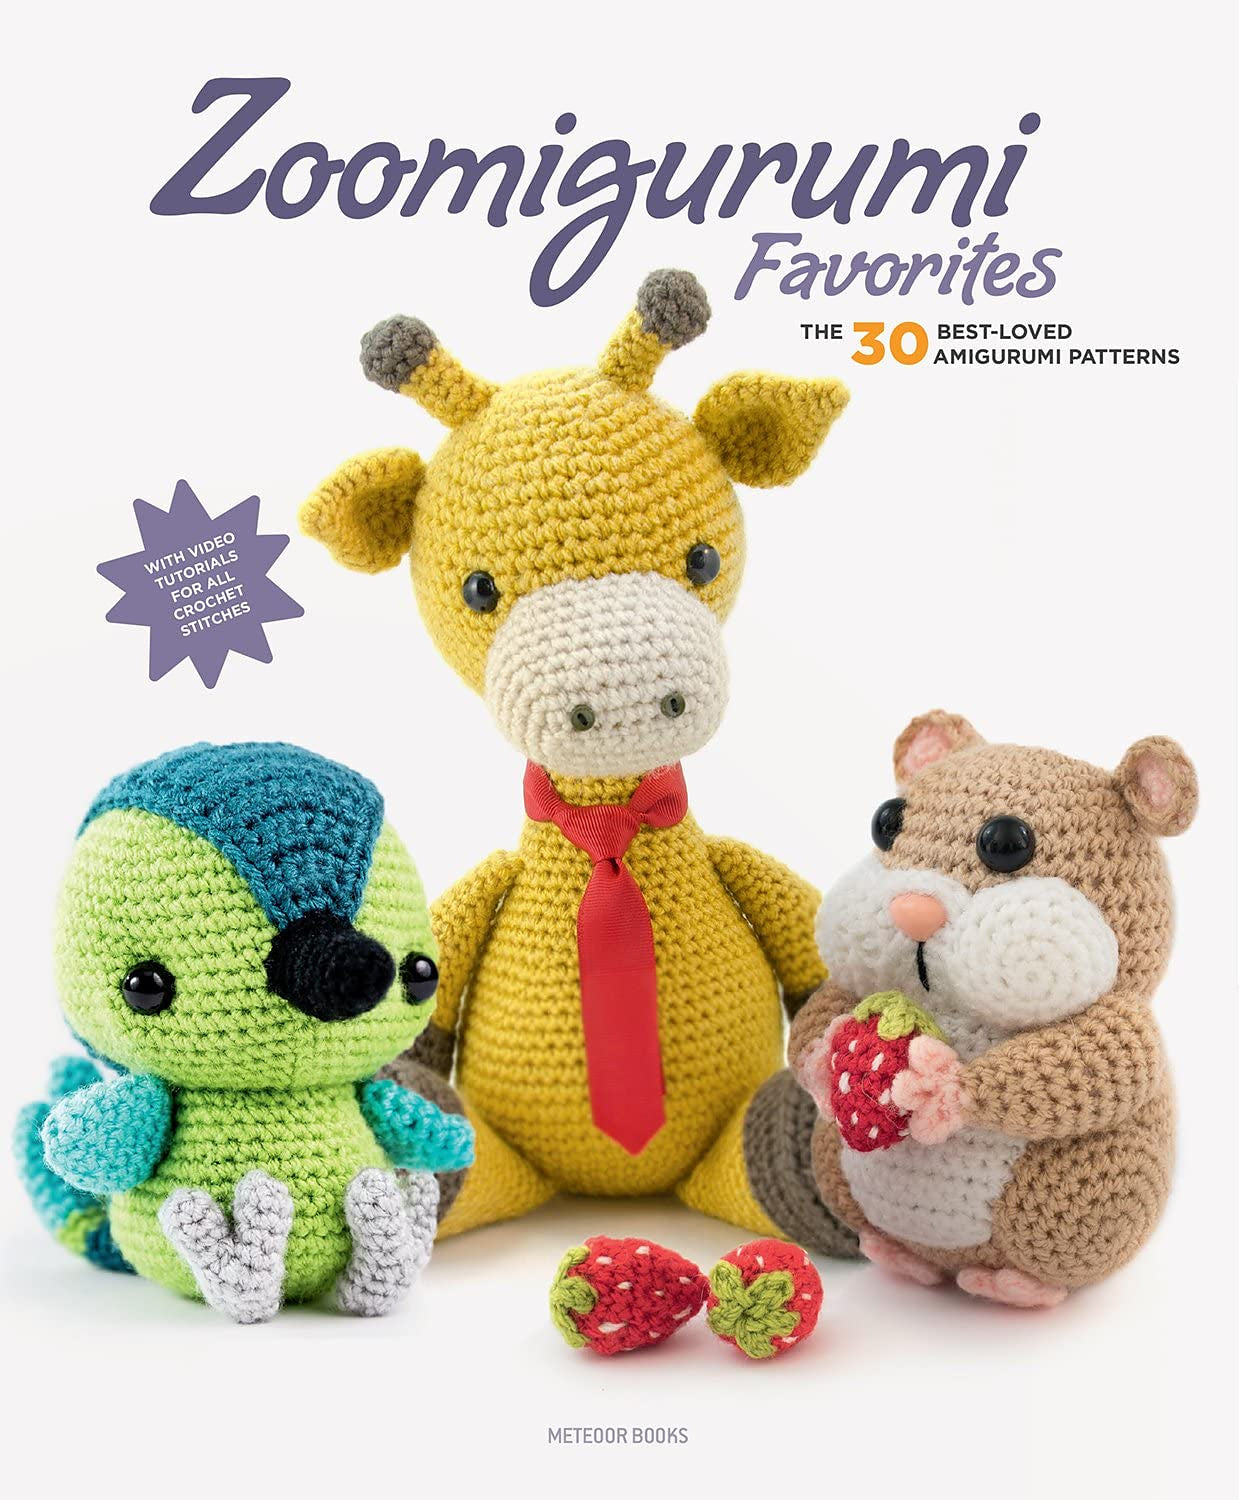 Books - DIY Fluffies Amigurumi crochet and Toy sewing patterns